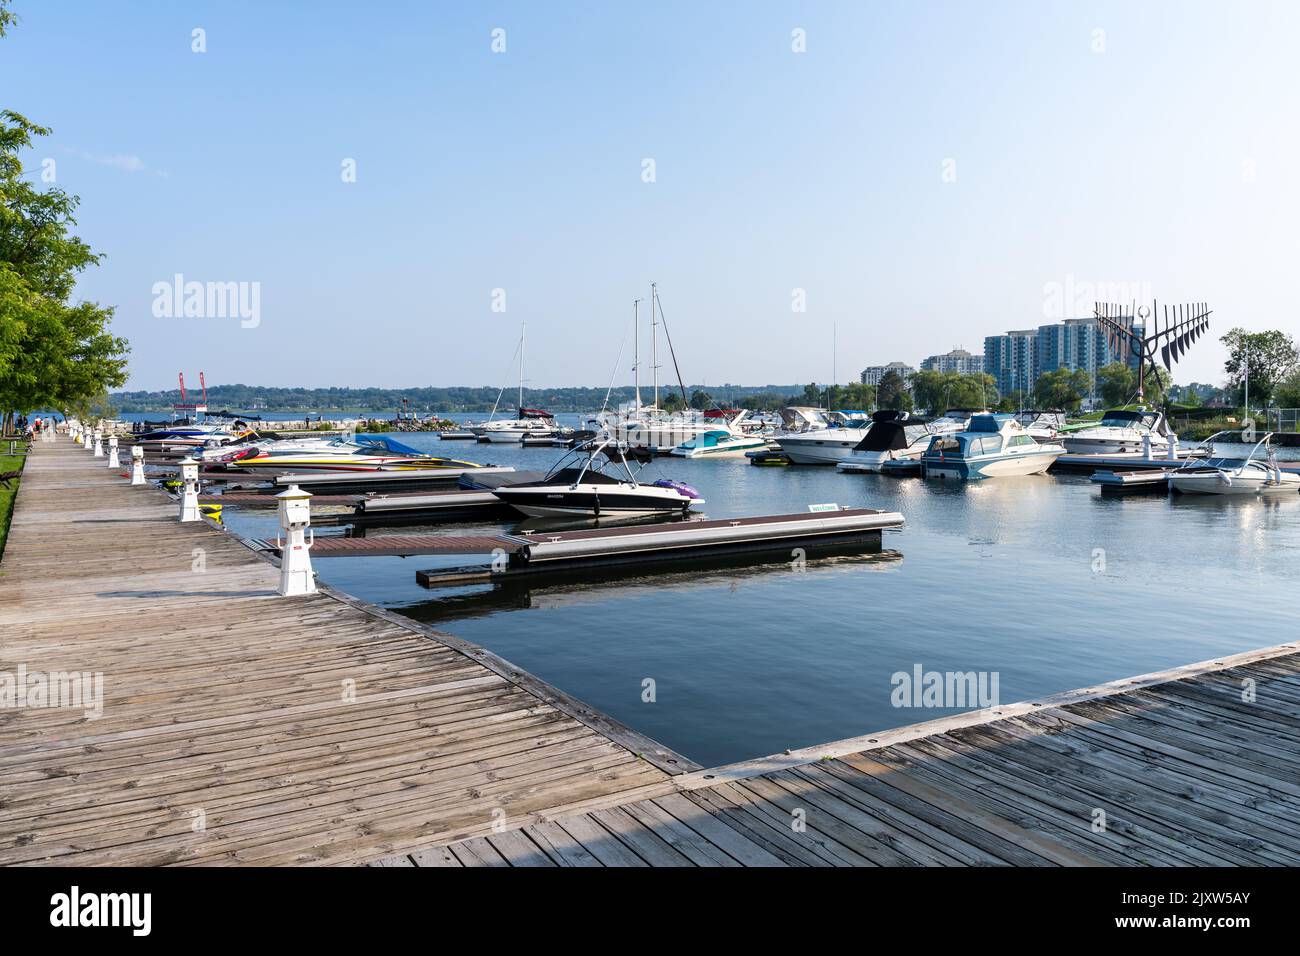 City of Barrie Marina Boat Launch and Dock. Kempenfelt Bay, Lake Simcoe. Barrie, Ontario, Canada Stock Photo